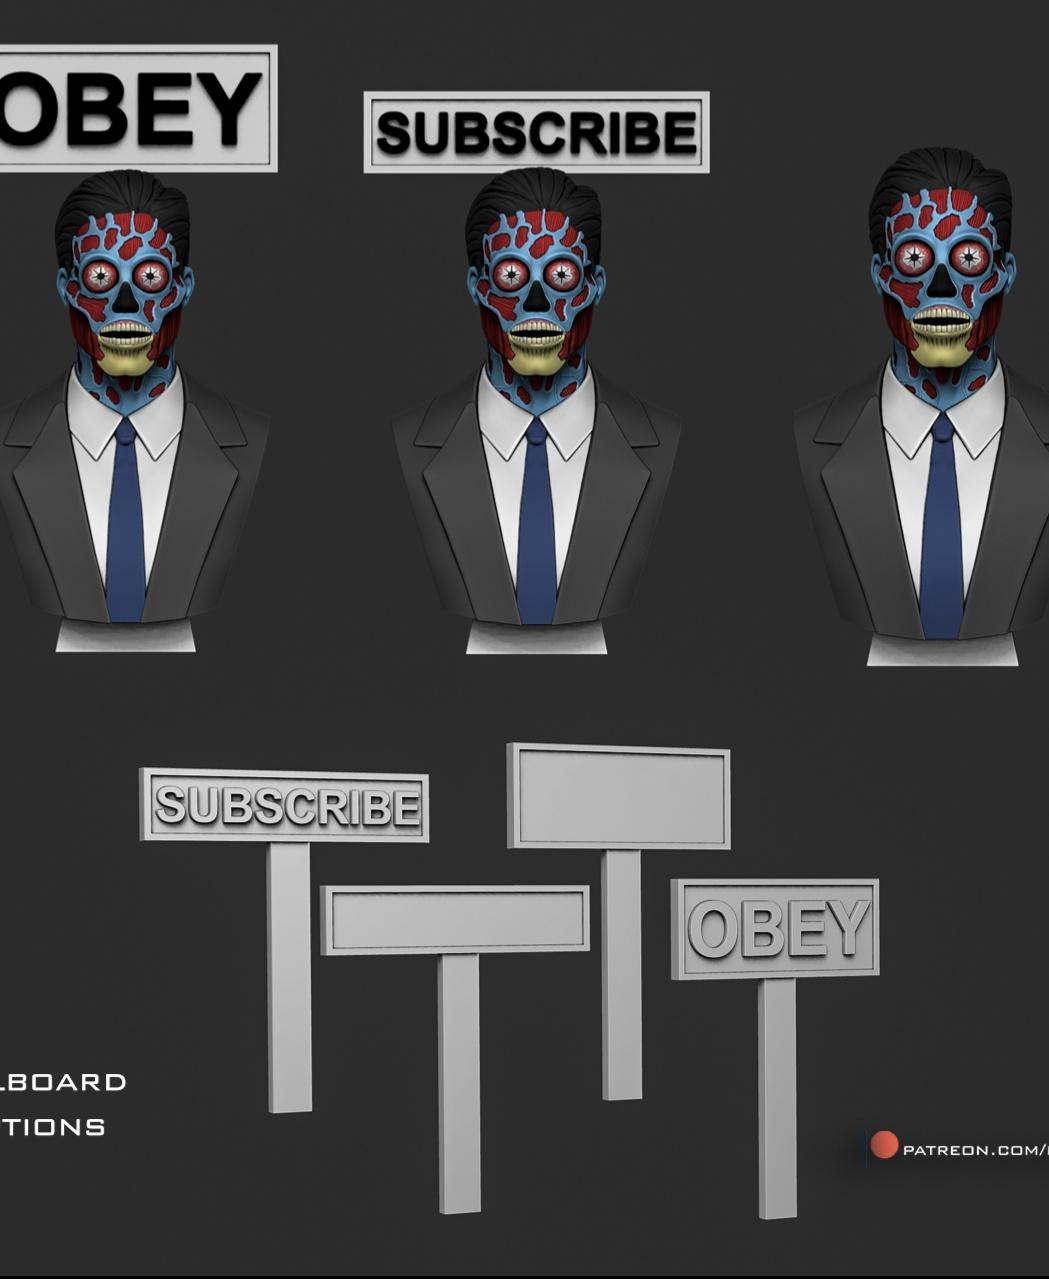 They live 3d model